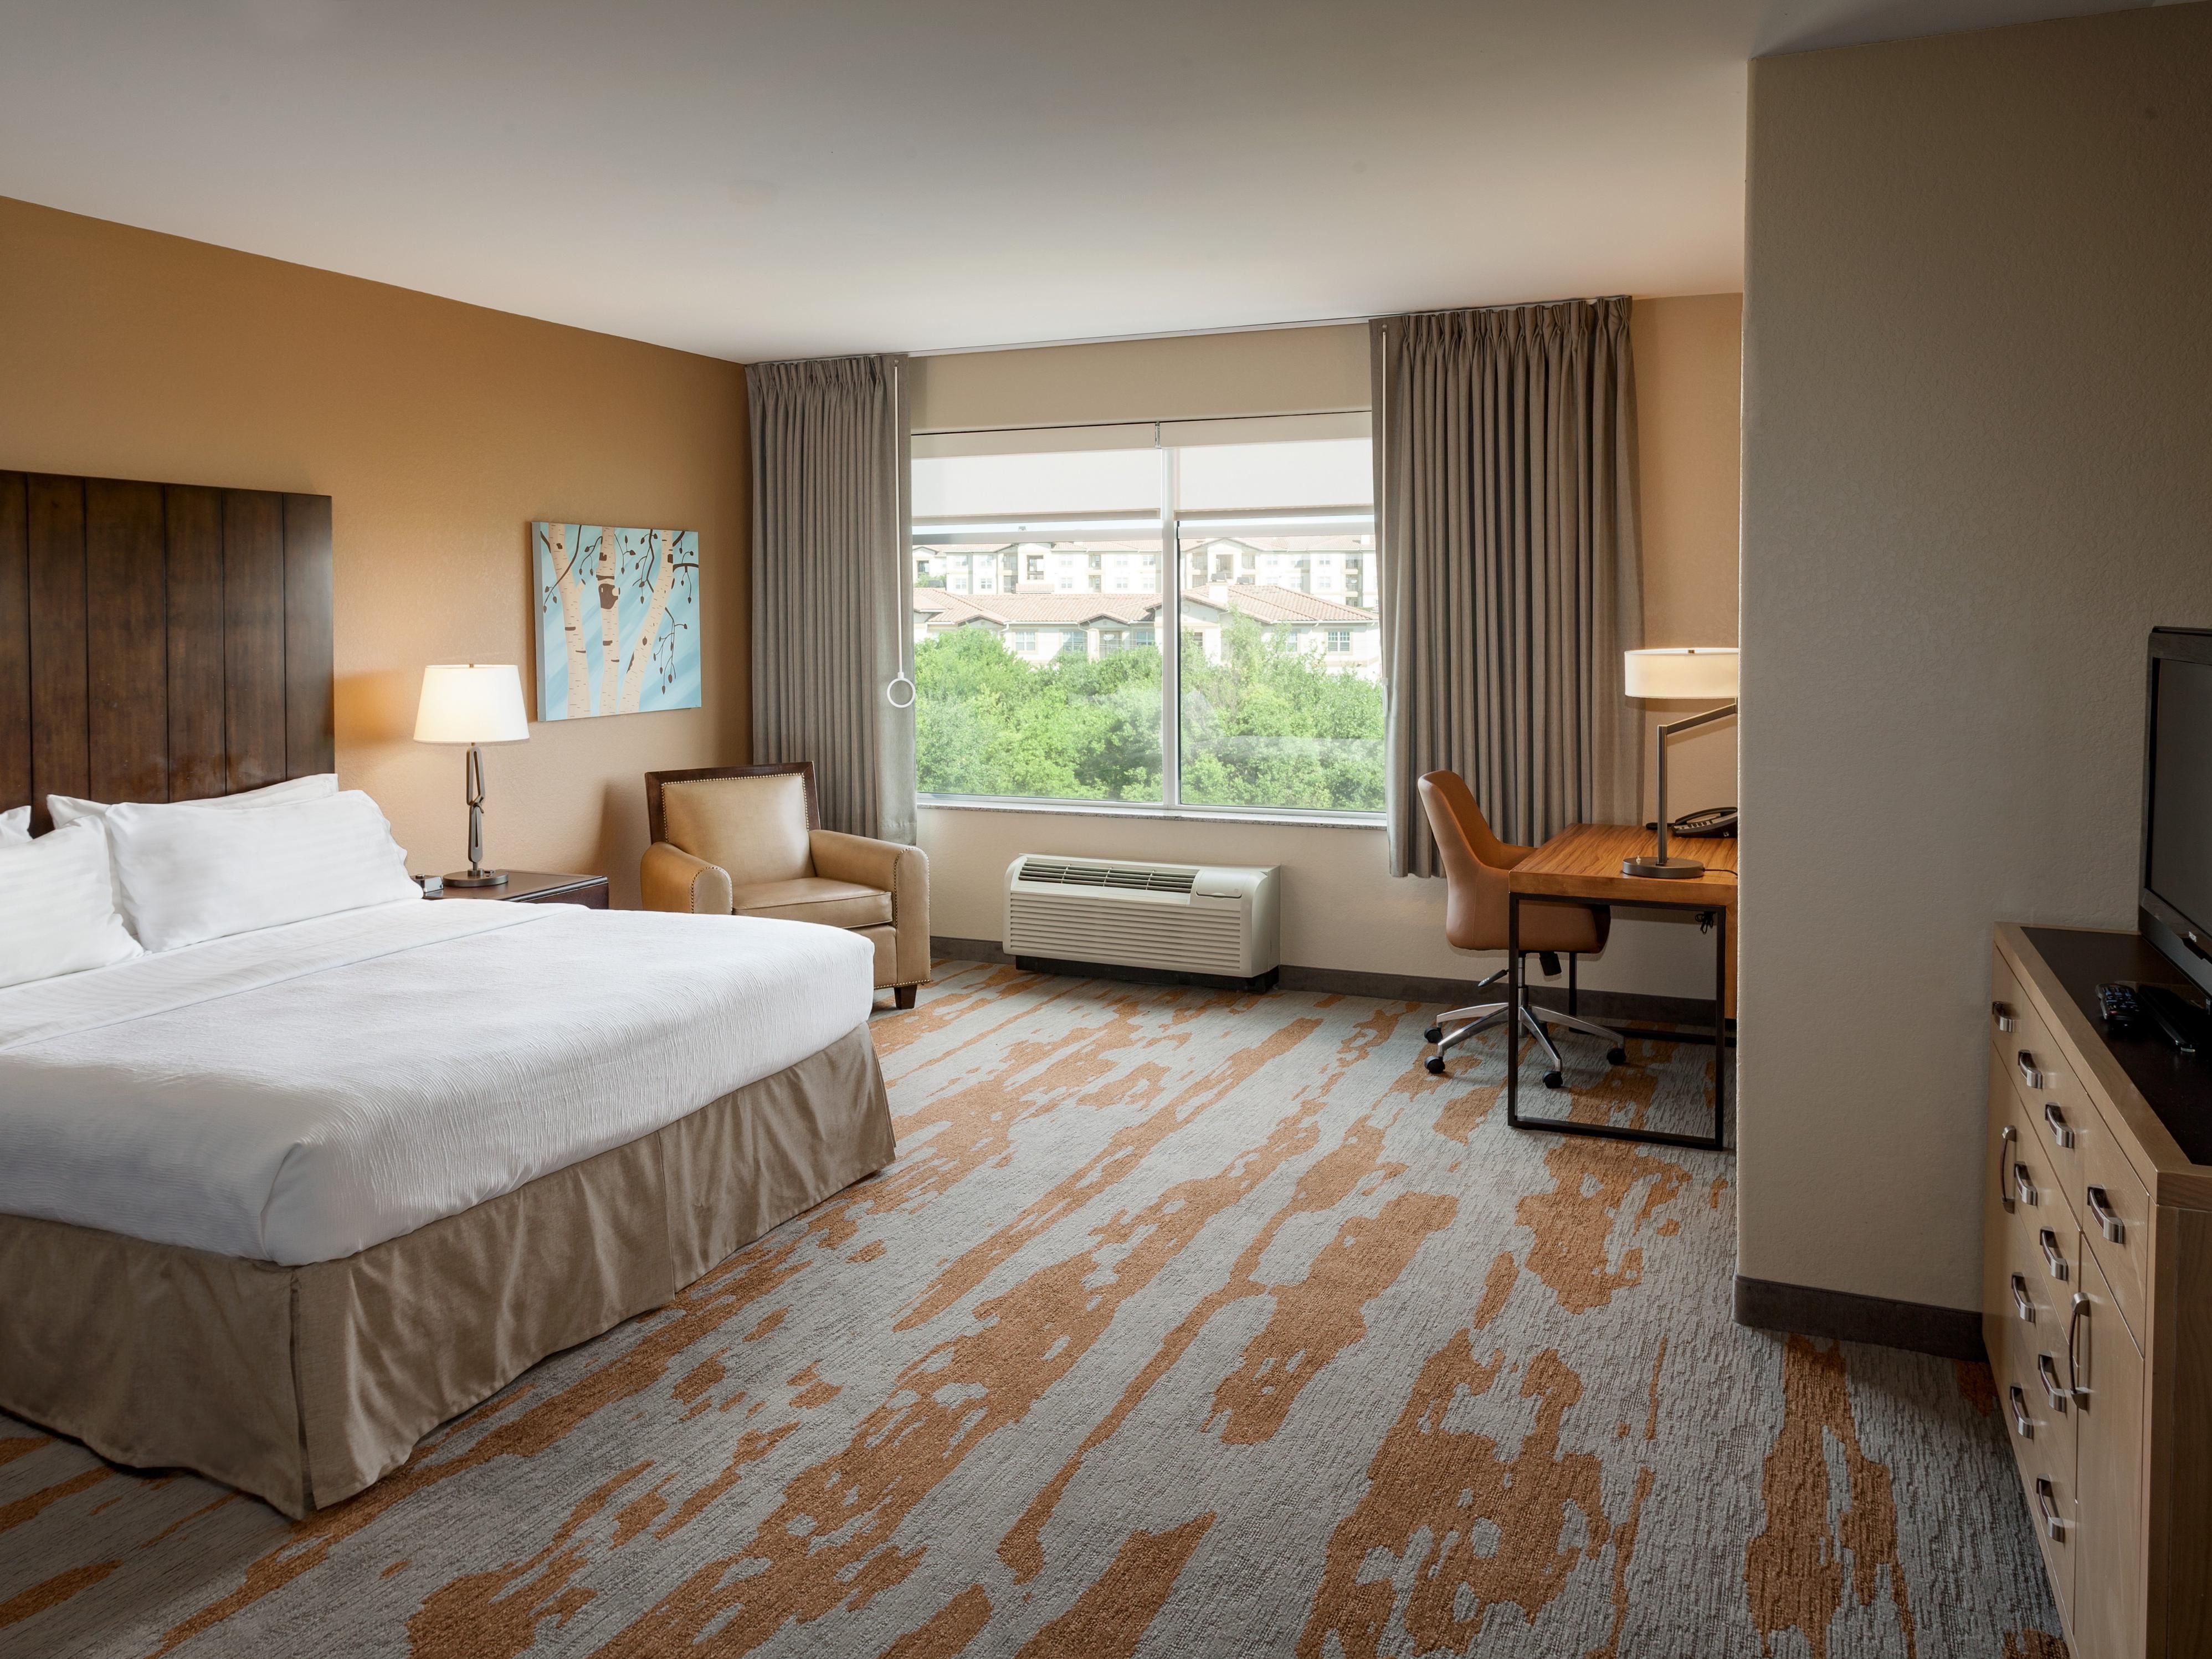 As the world adjusts to new travel norms, we’re enhancing our safety and cleanliness commitment to our guests. That means clean, well maintained, clutter-free rooms that exceed your expectations. If this isn’t exactly what you find when you arrive, then we promise to make it right. We're here to ensure you have a safe and memorable experience. 